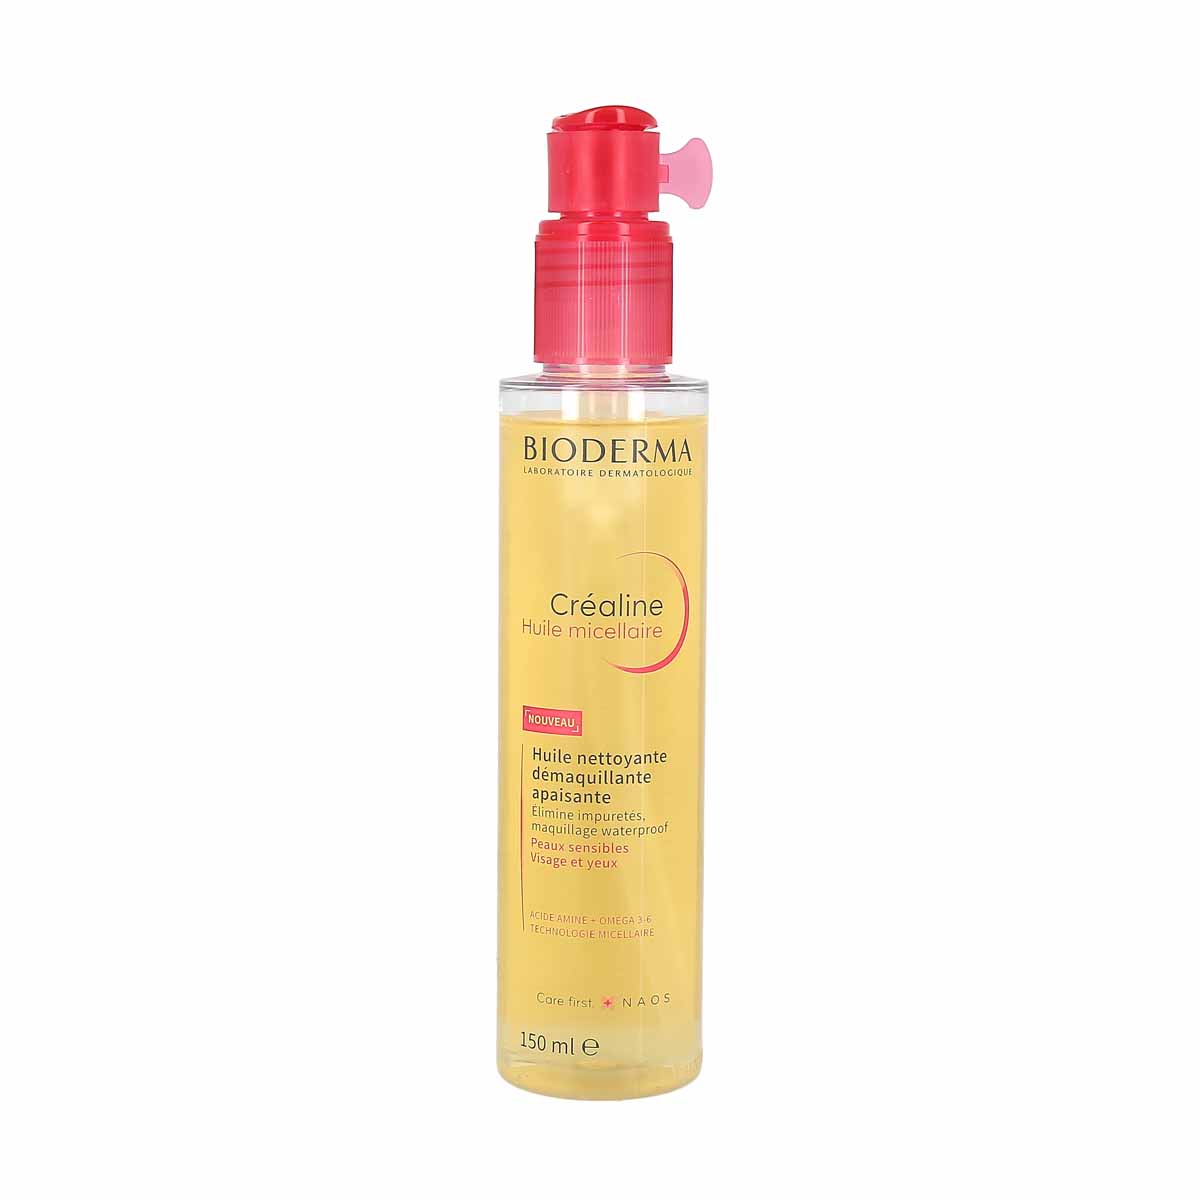 Bioderma Créaline Huile Micellaire 150ml